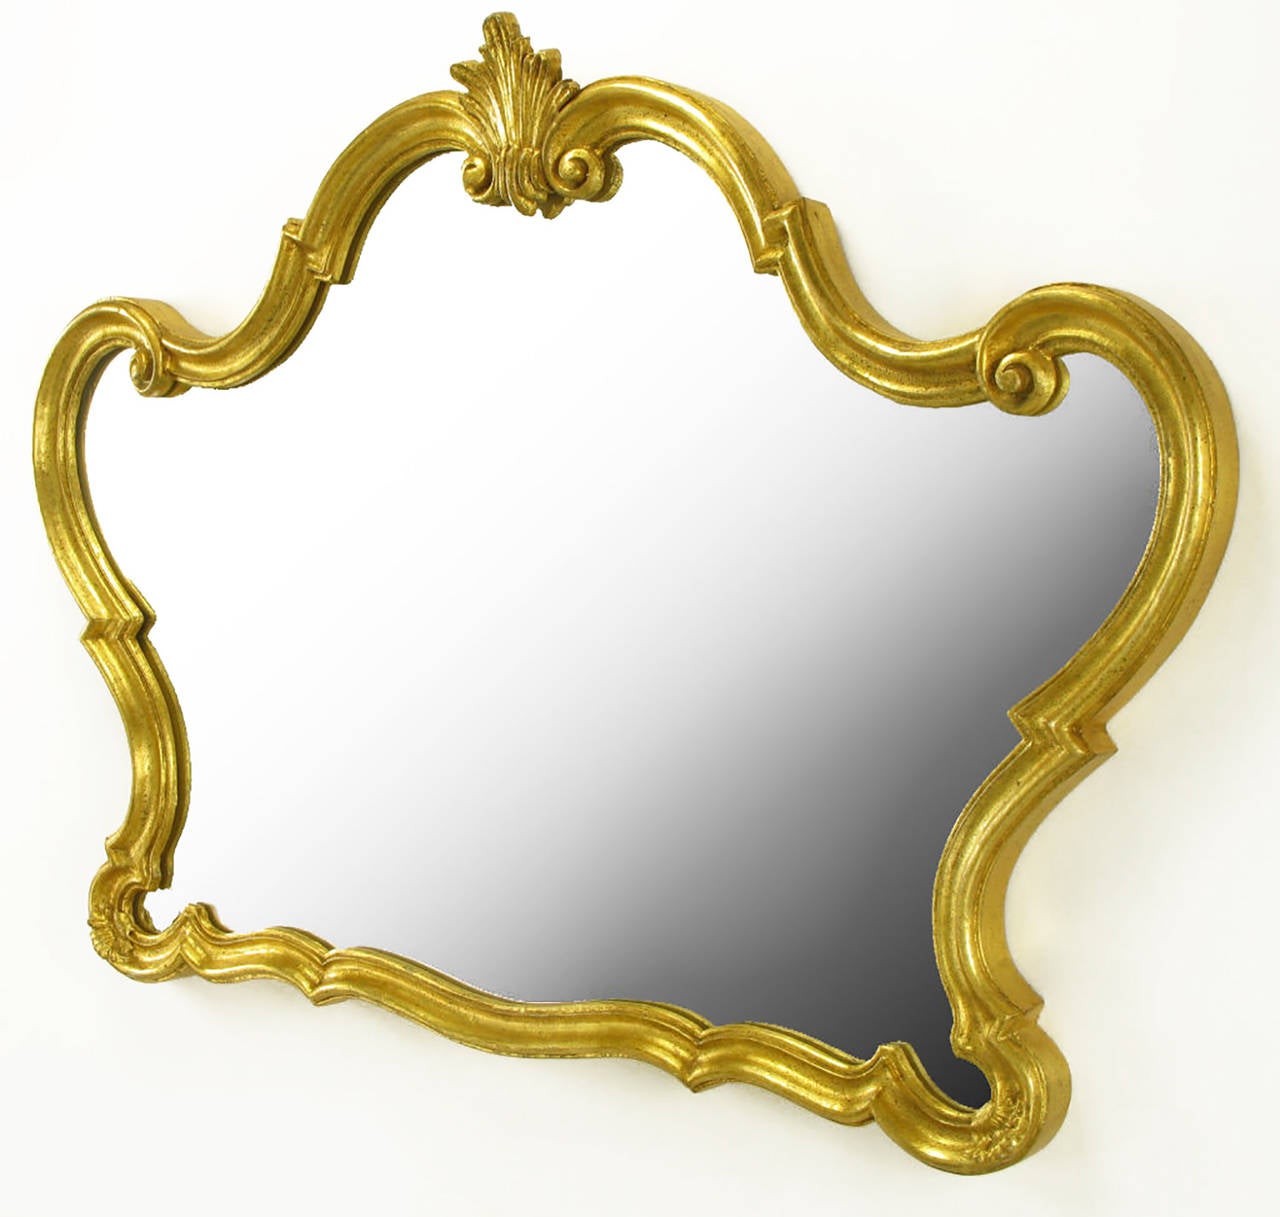 Italian mirror consisting of wood, composite wood and gesso. Finished in gold leaf. Handmade by Florentia. Would make a striking vanity mirror or overmantel mirror.